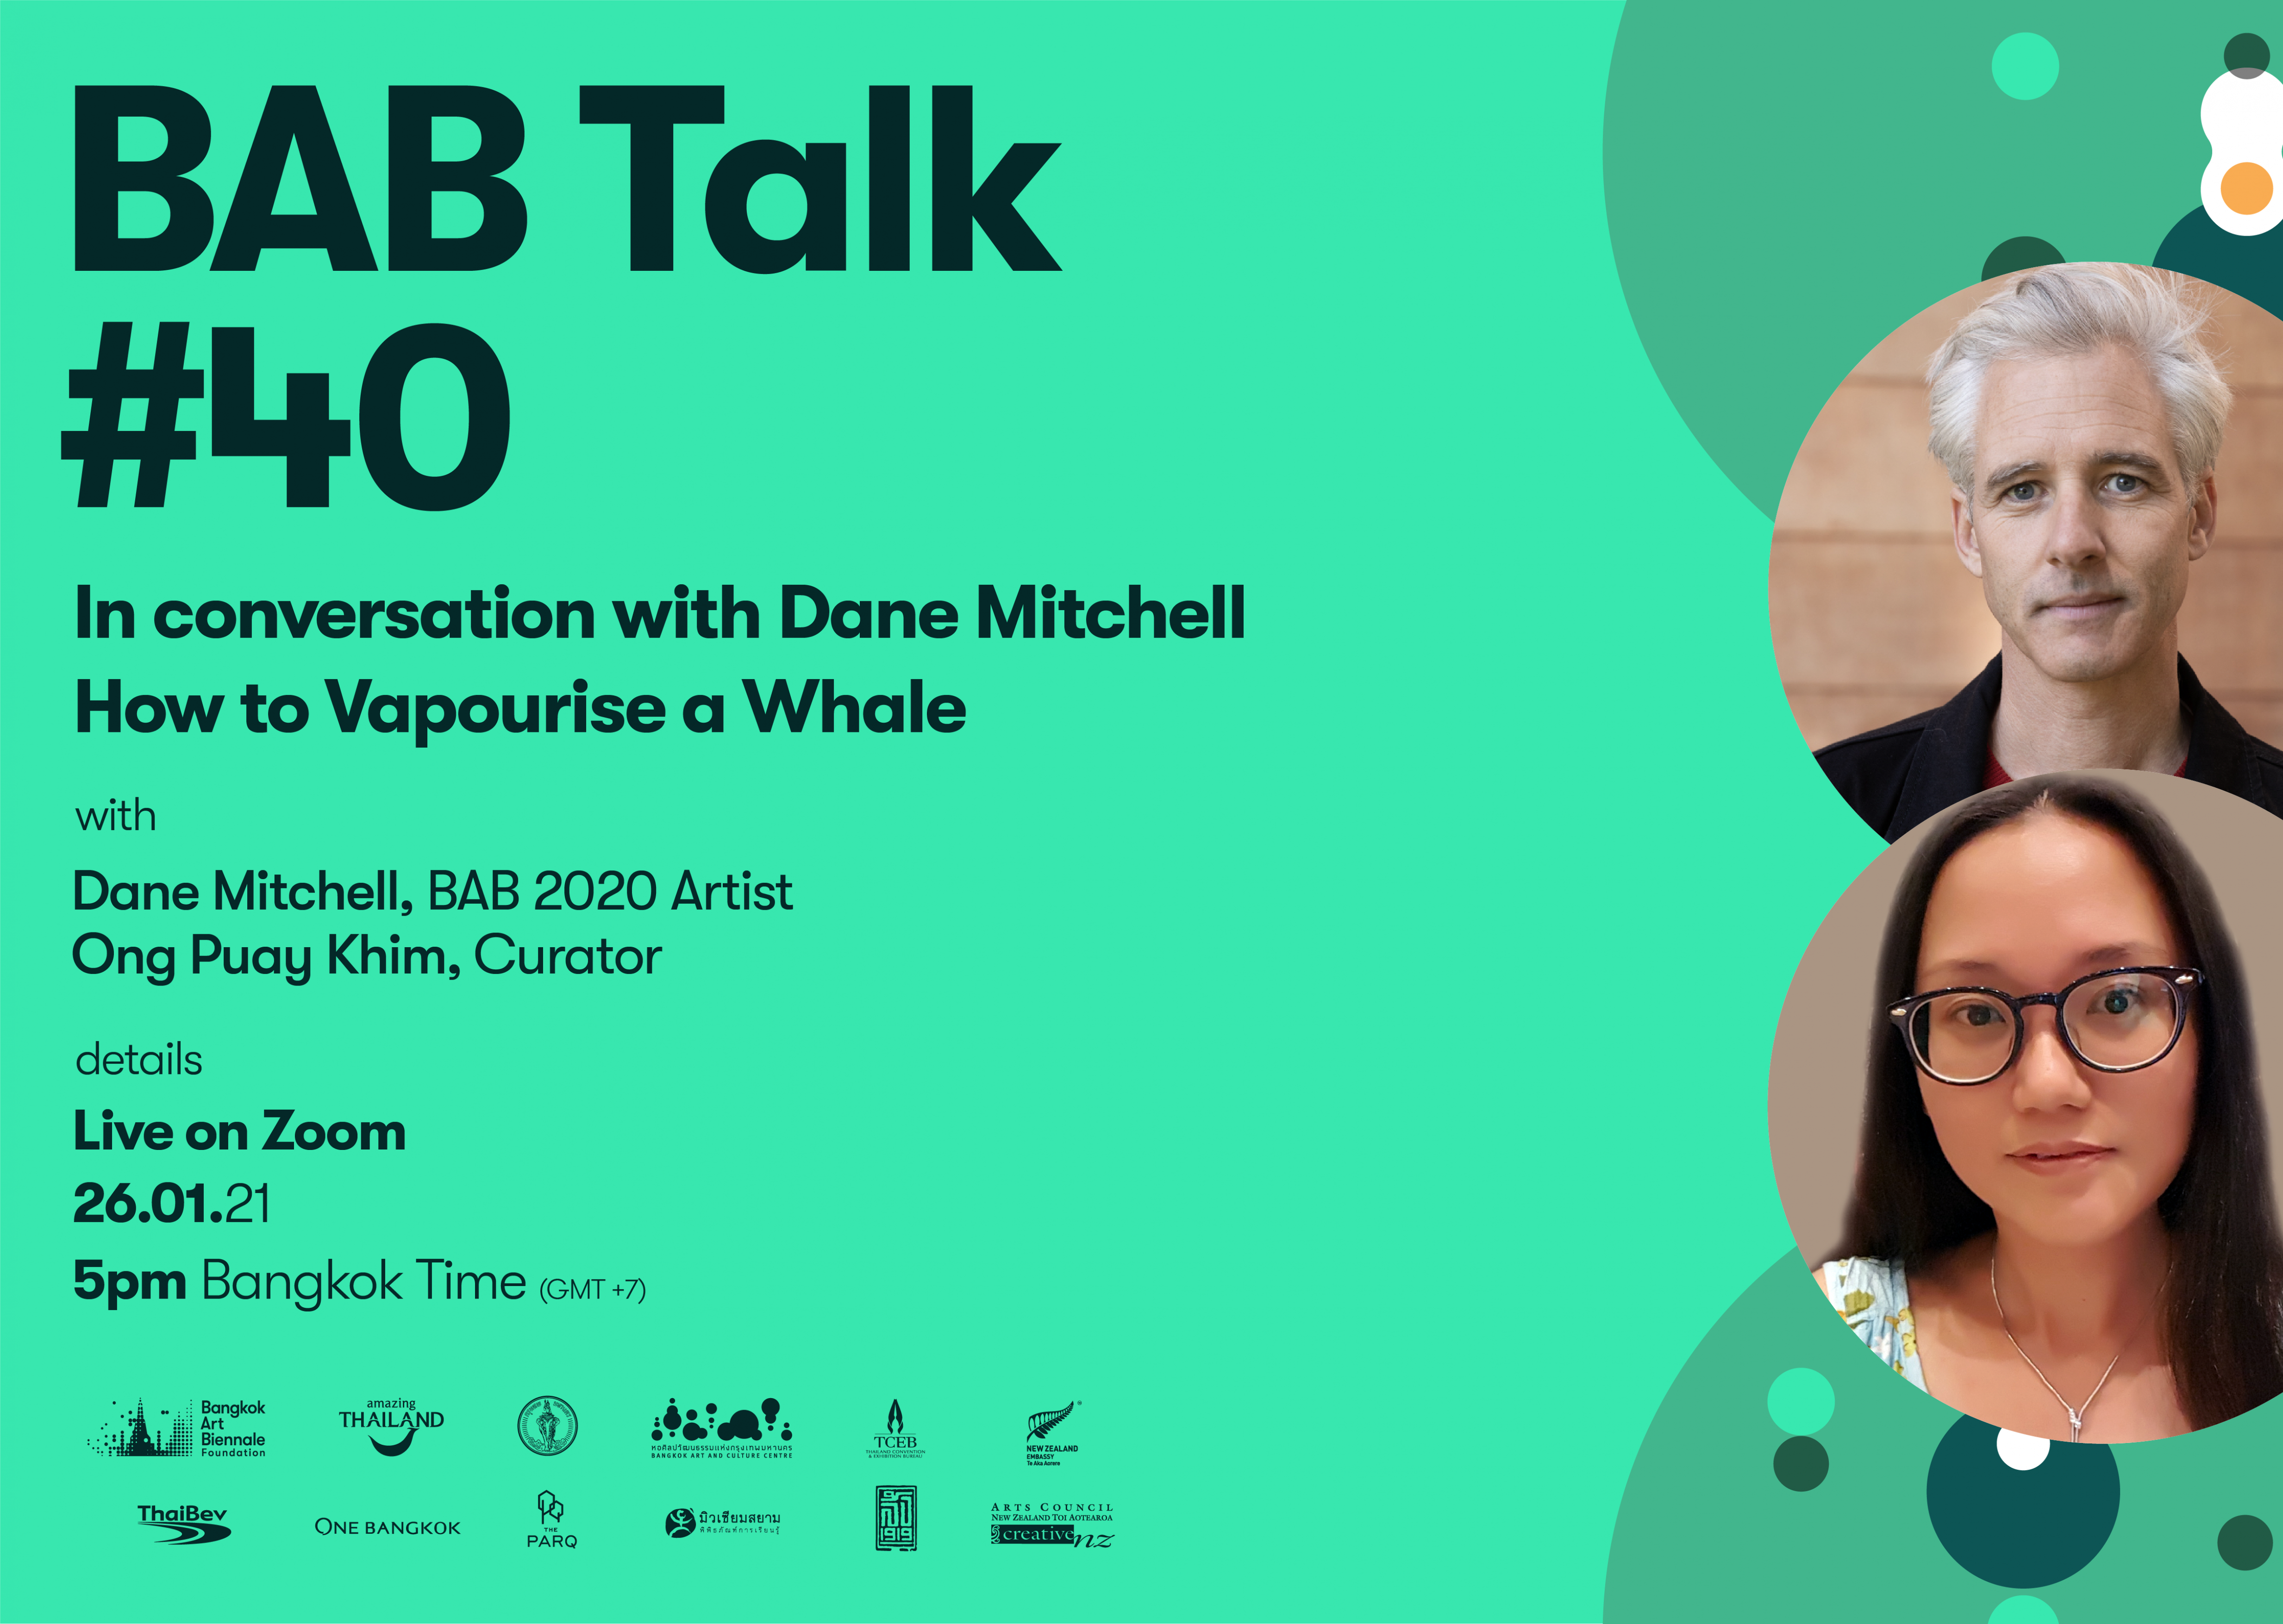 BAB Talk #40 | How to Vapourise a Whale with Dane Mitchell and Ong Puay Khim